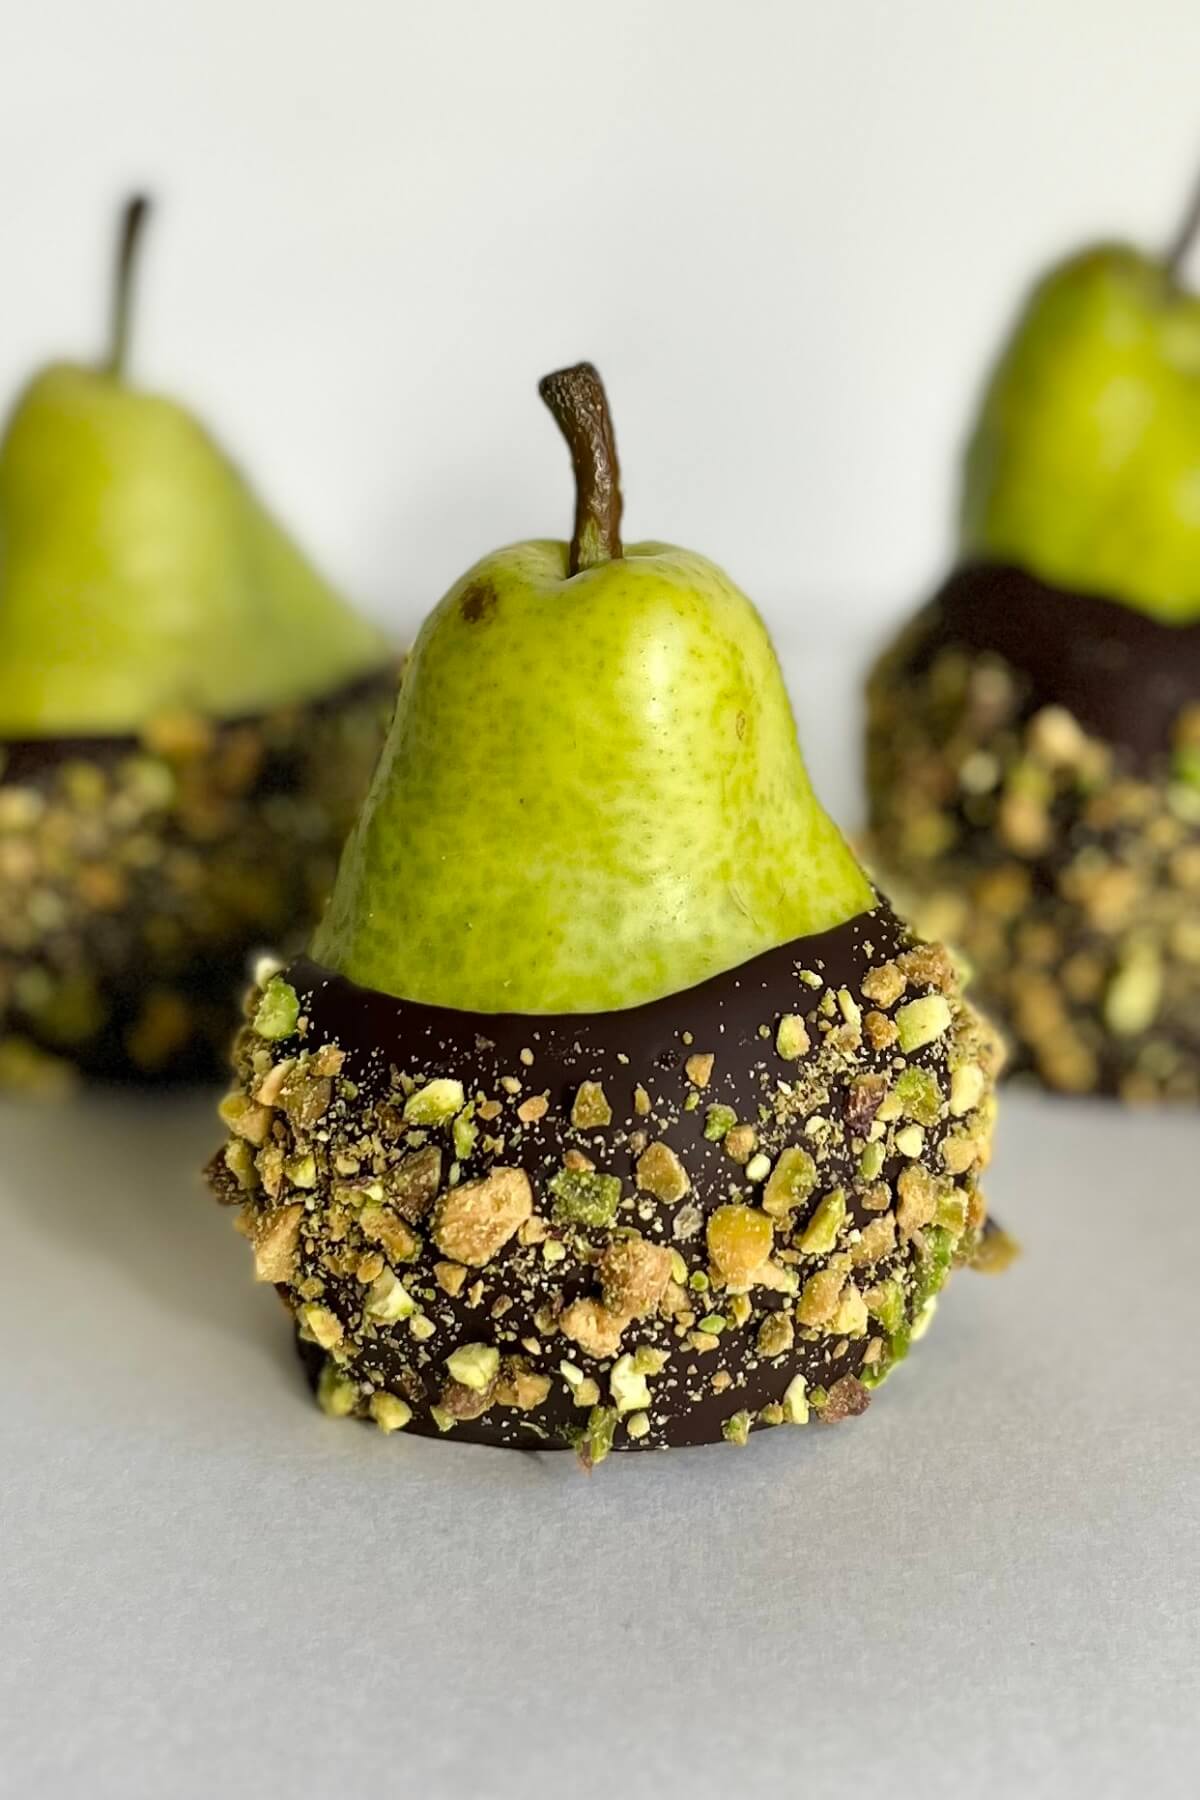 Three pistachio crusted chocolate pears against a white background.